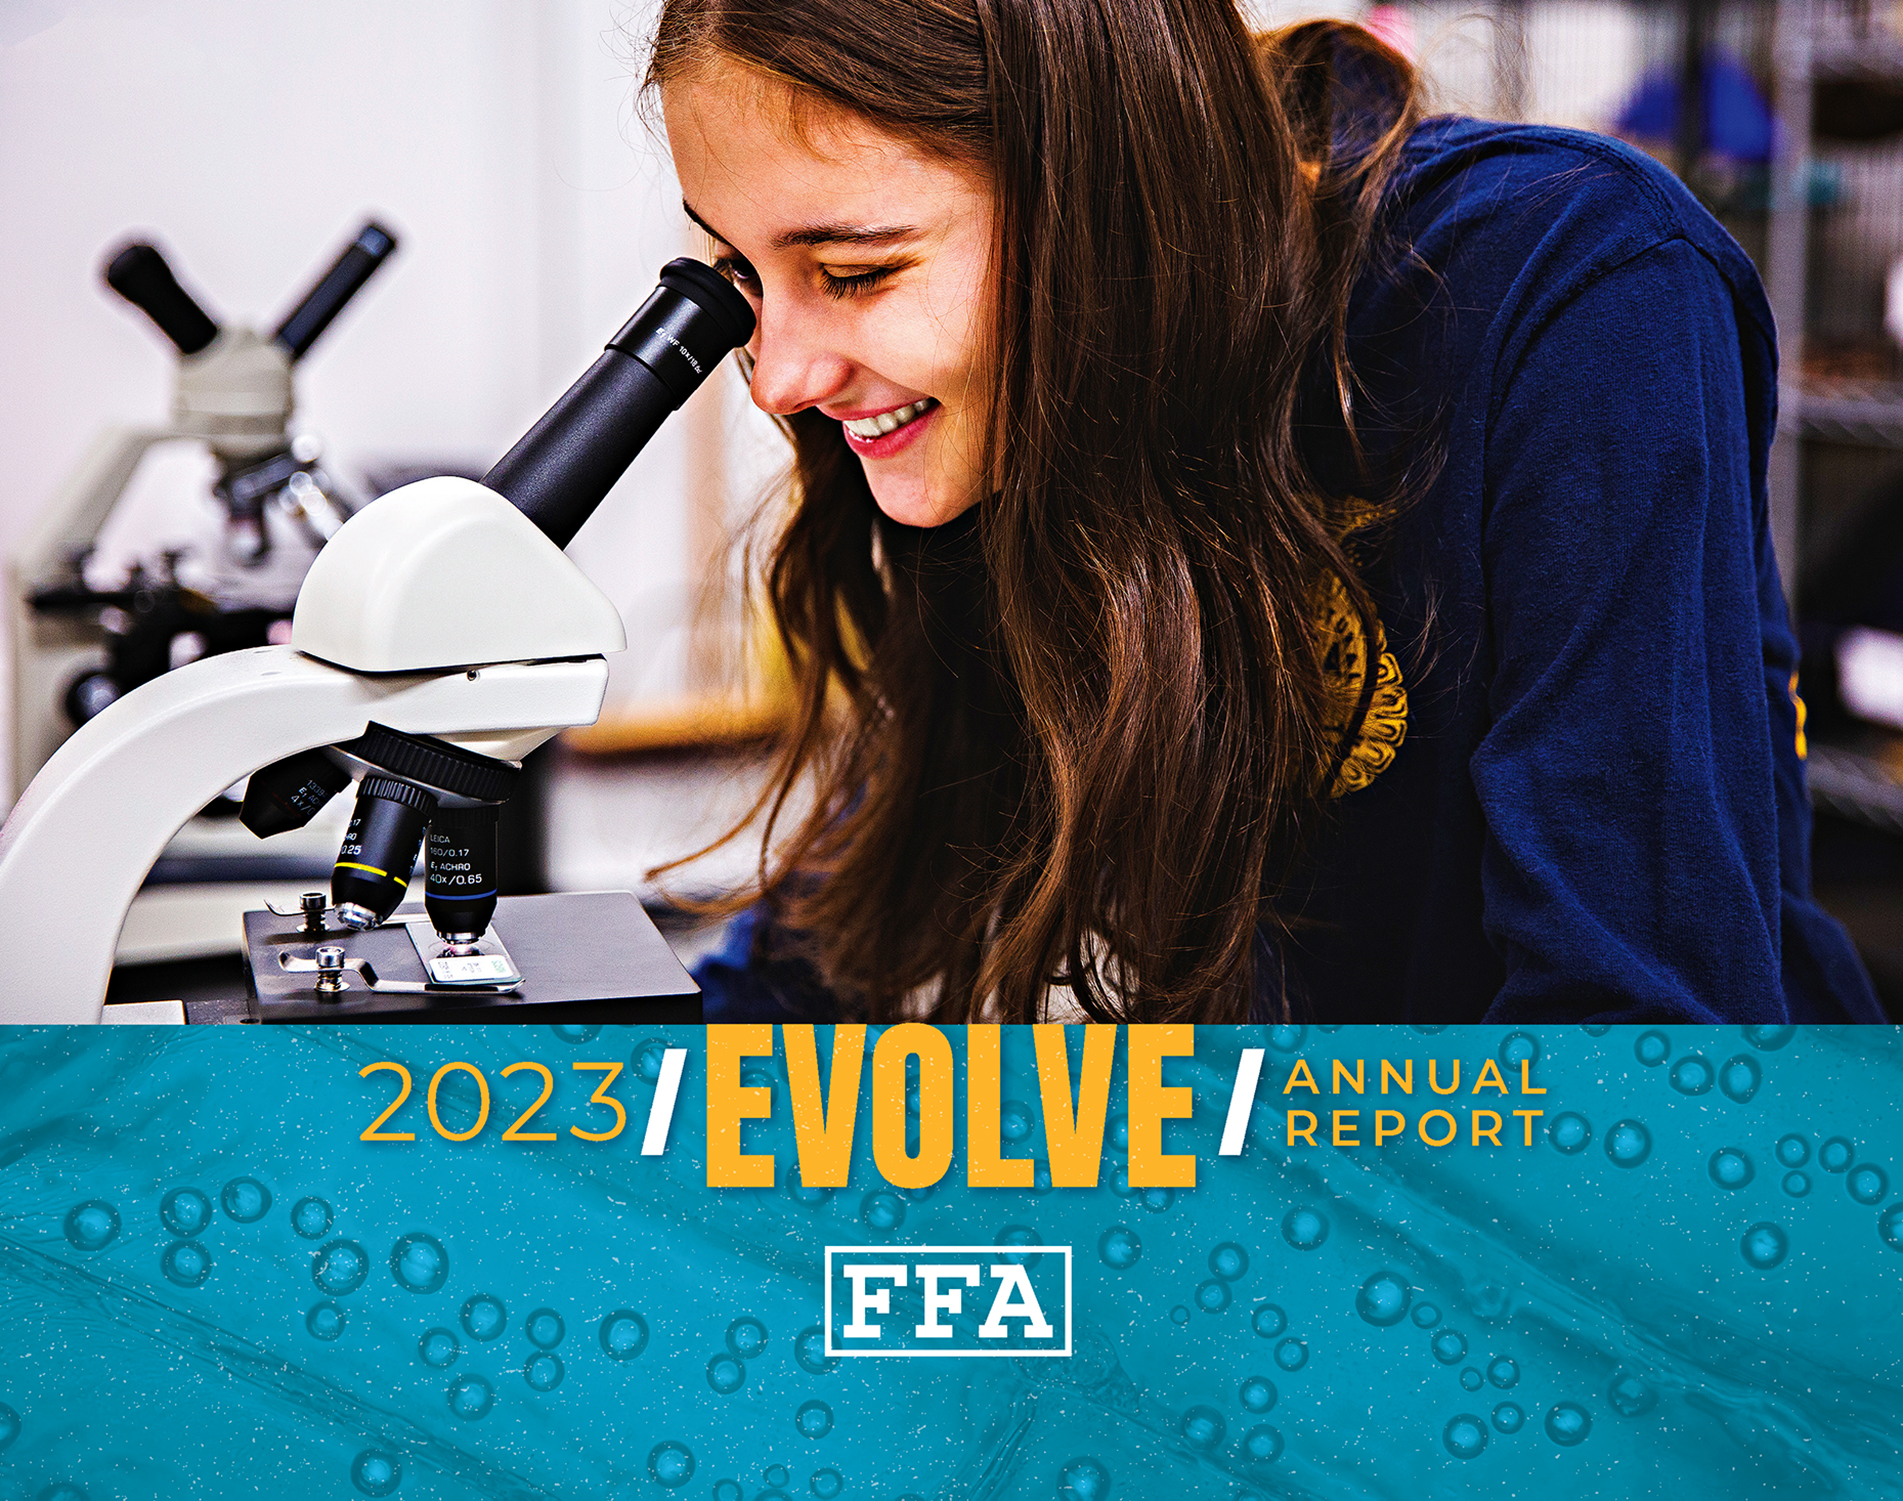 Five FFA Members | Evolve/Engage/Empower | 2022 Annual Report Hero Image